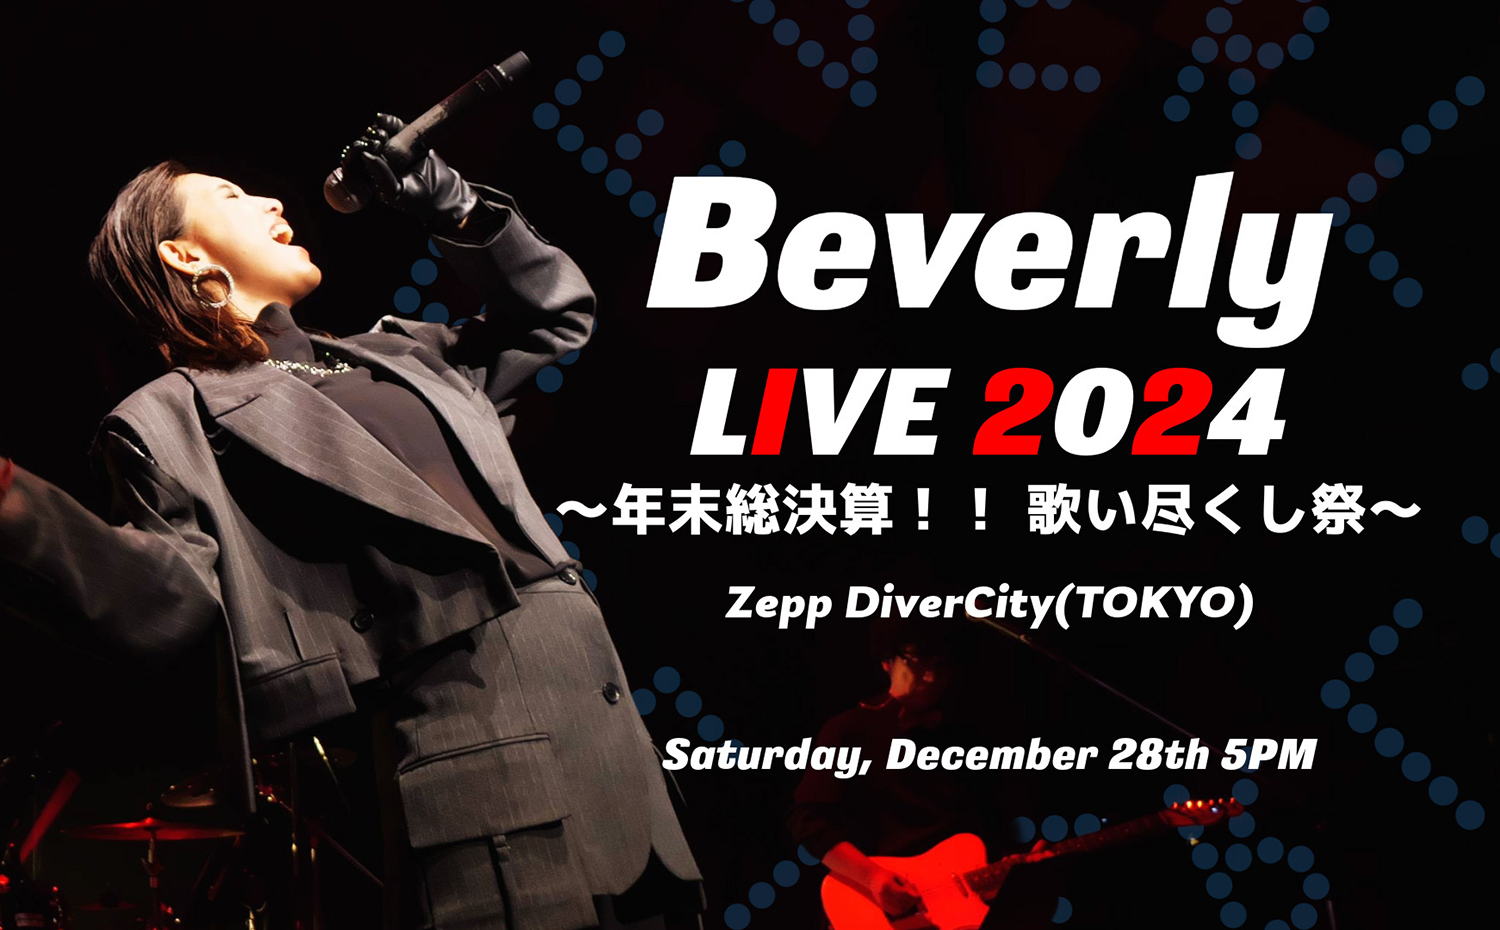 Beverly LIVE 2024 ~Year-end final settlement!! Singing festival~